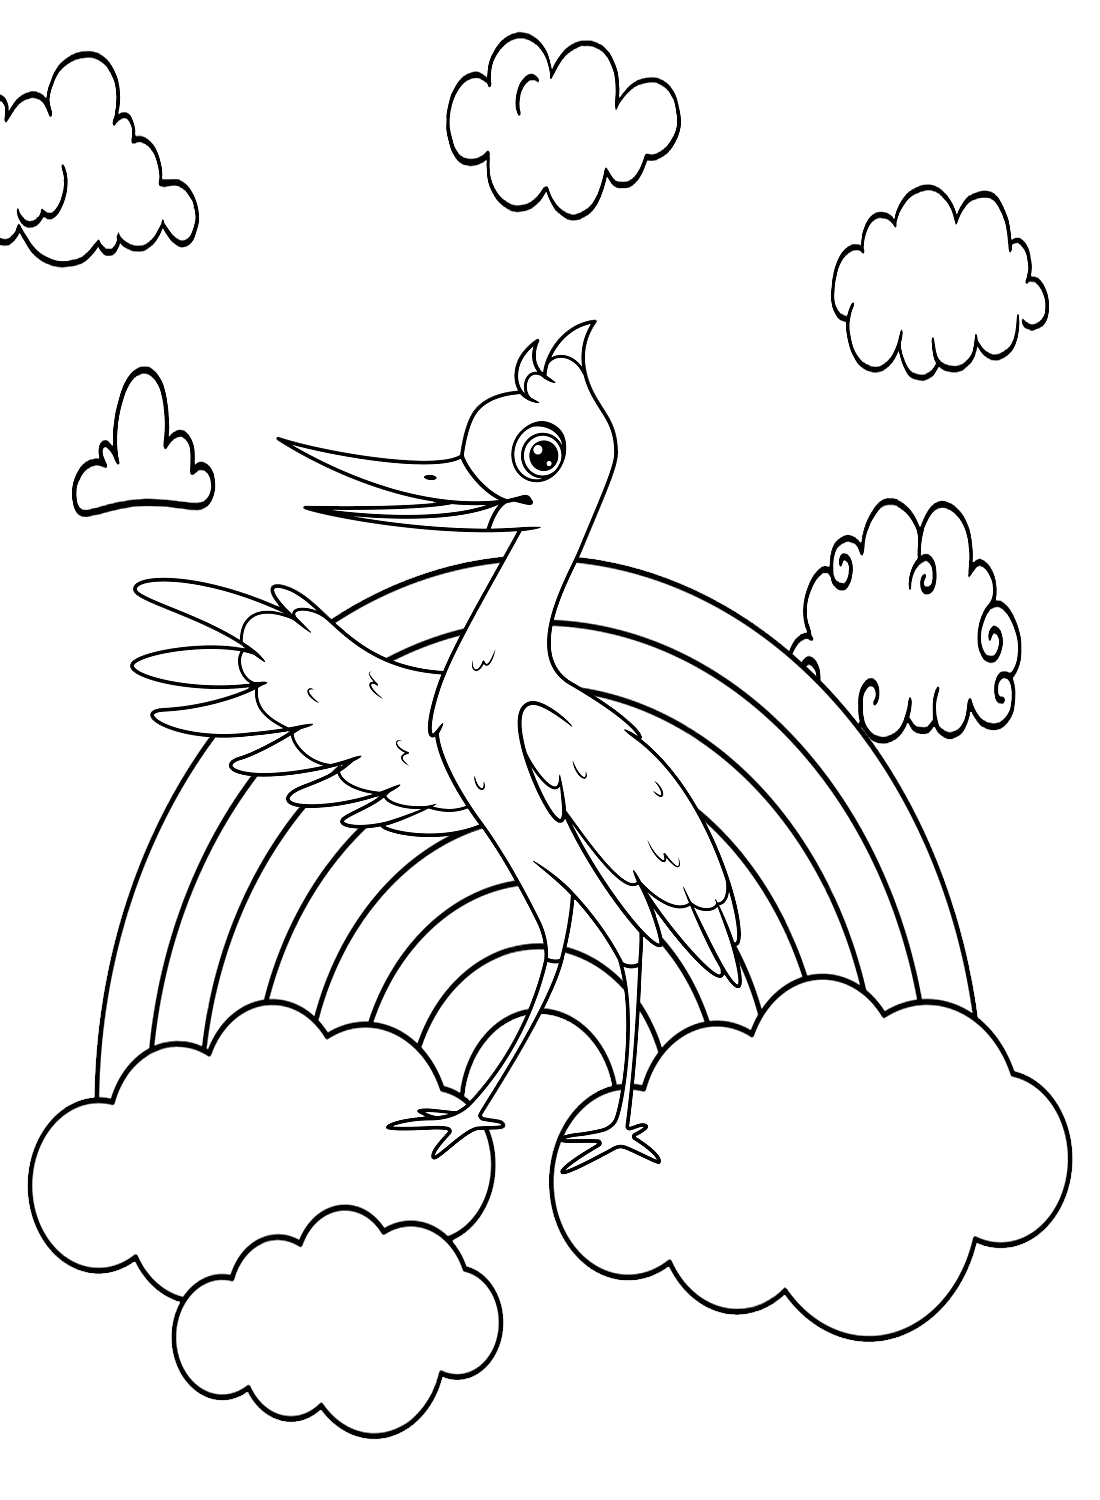 Stork with Rainbow and Clouds from Stork